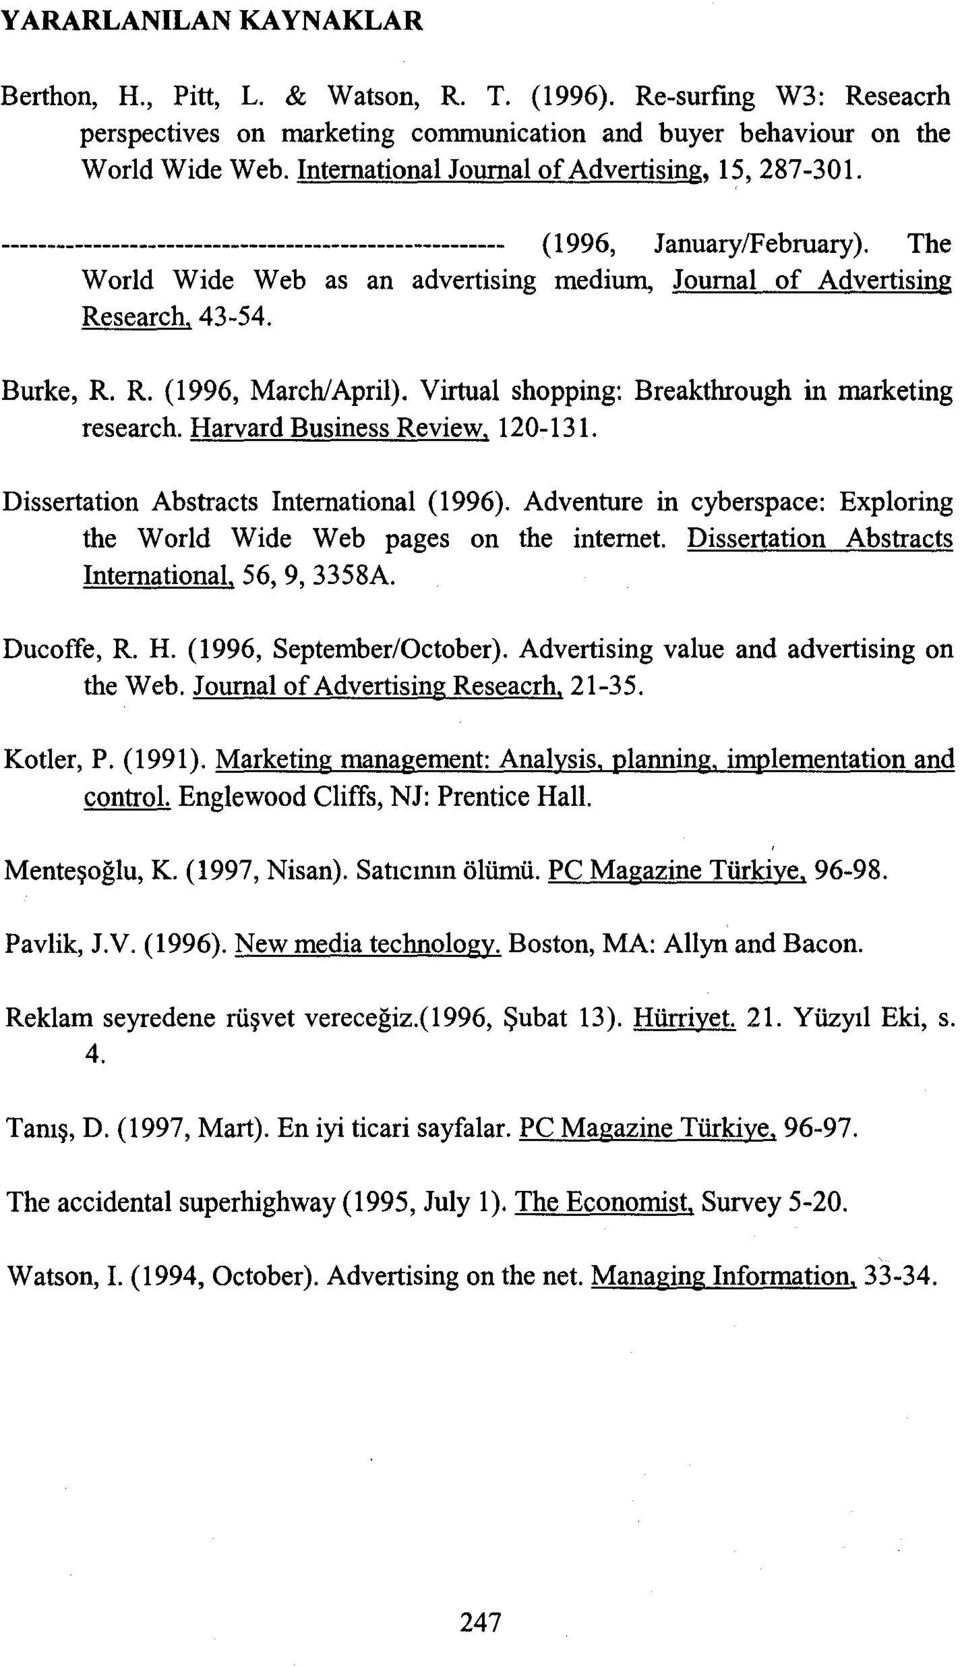 The World Wde Web as an advertsng medum, Journal of Advertsng Research, 43-54. Burke, R. R. (1996, March/Aprl). Vrtual shoppng: Breakthrough n marketng research. Harvard Busness Revew, 120-131.